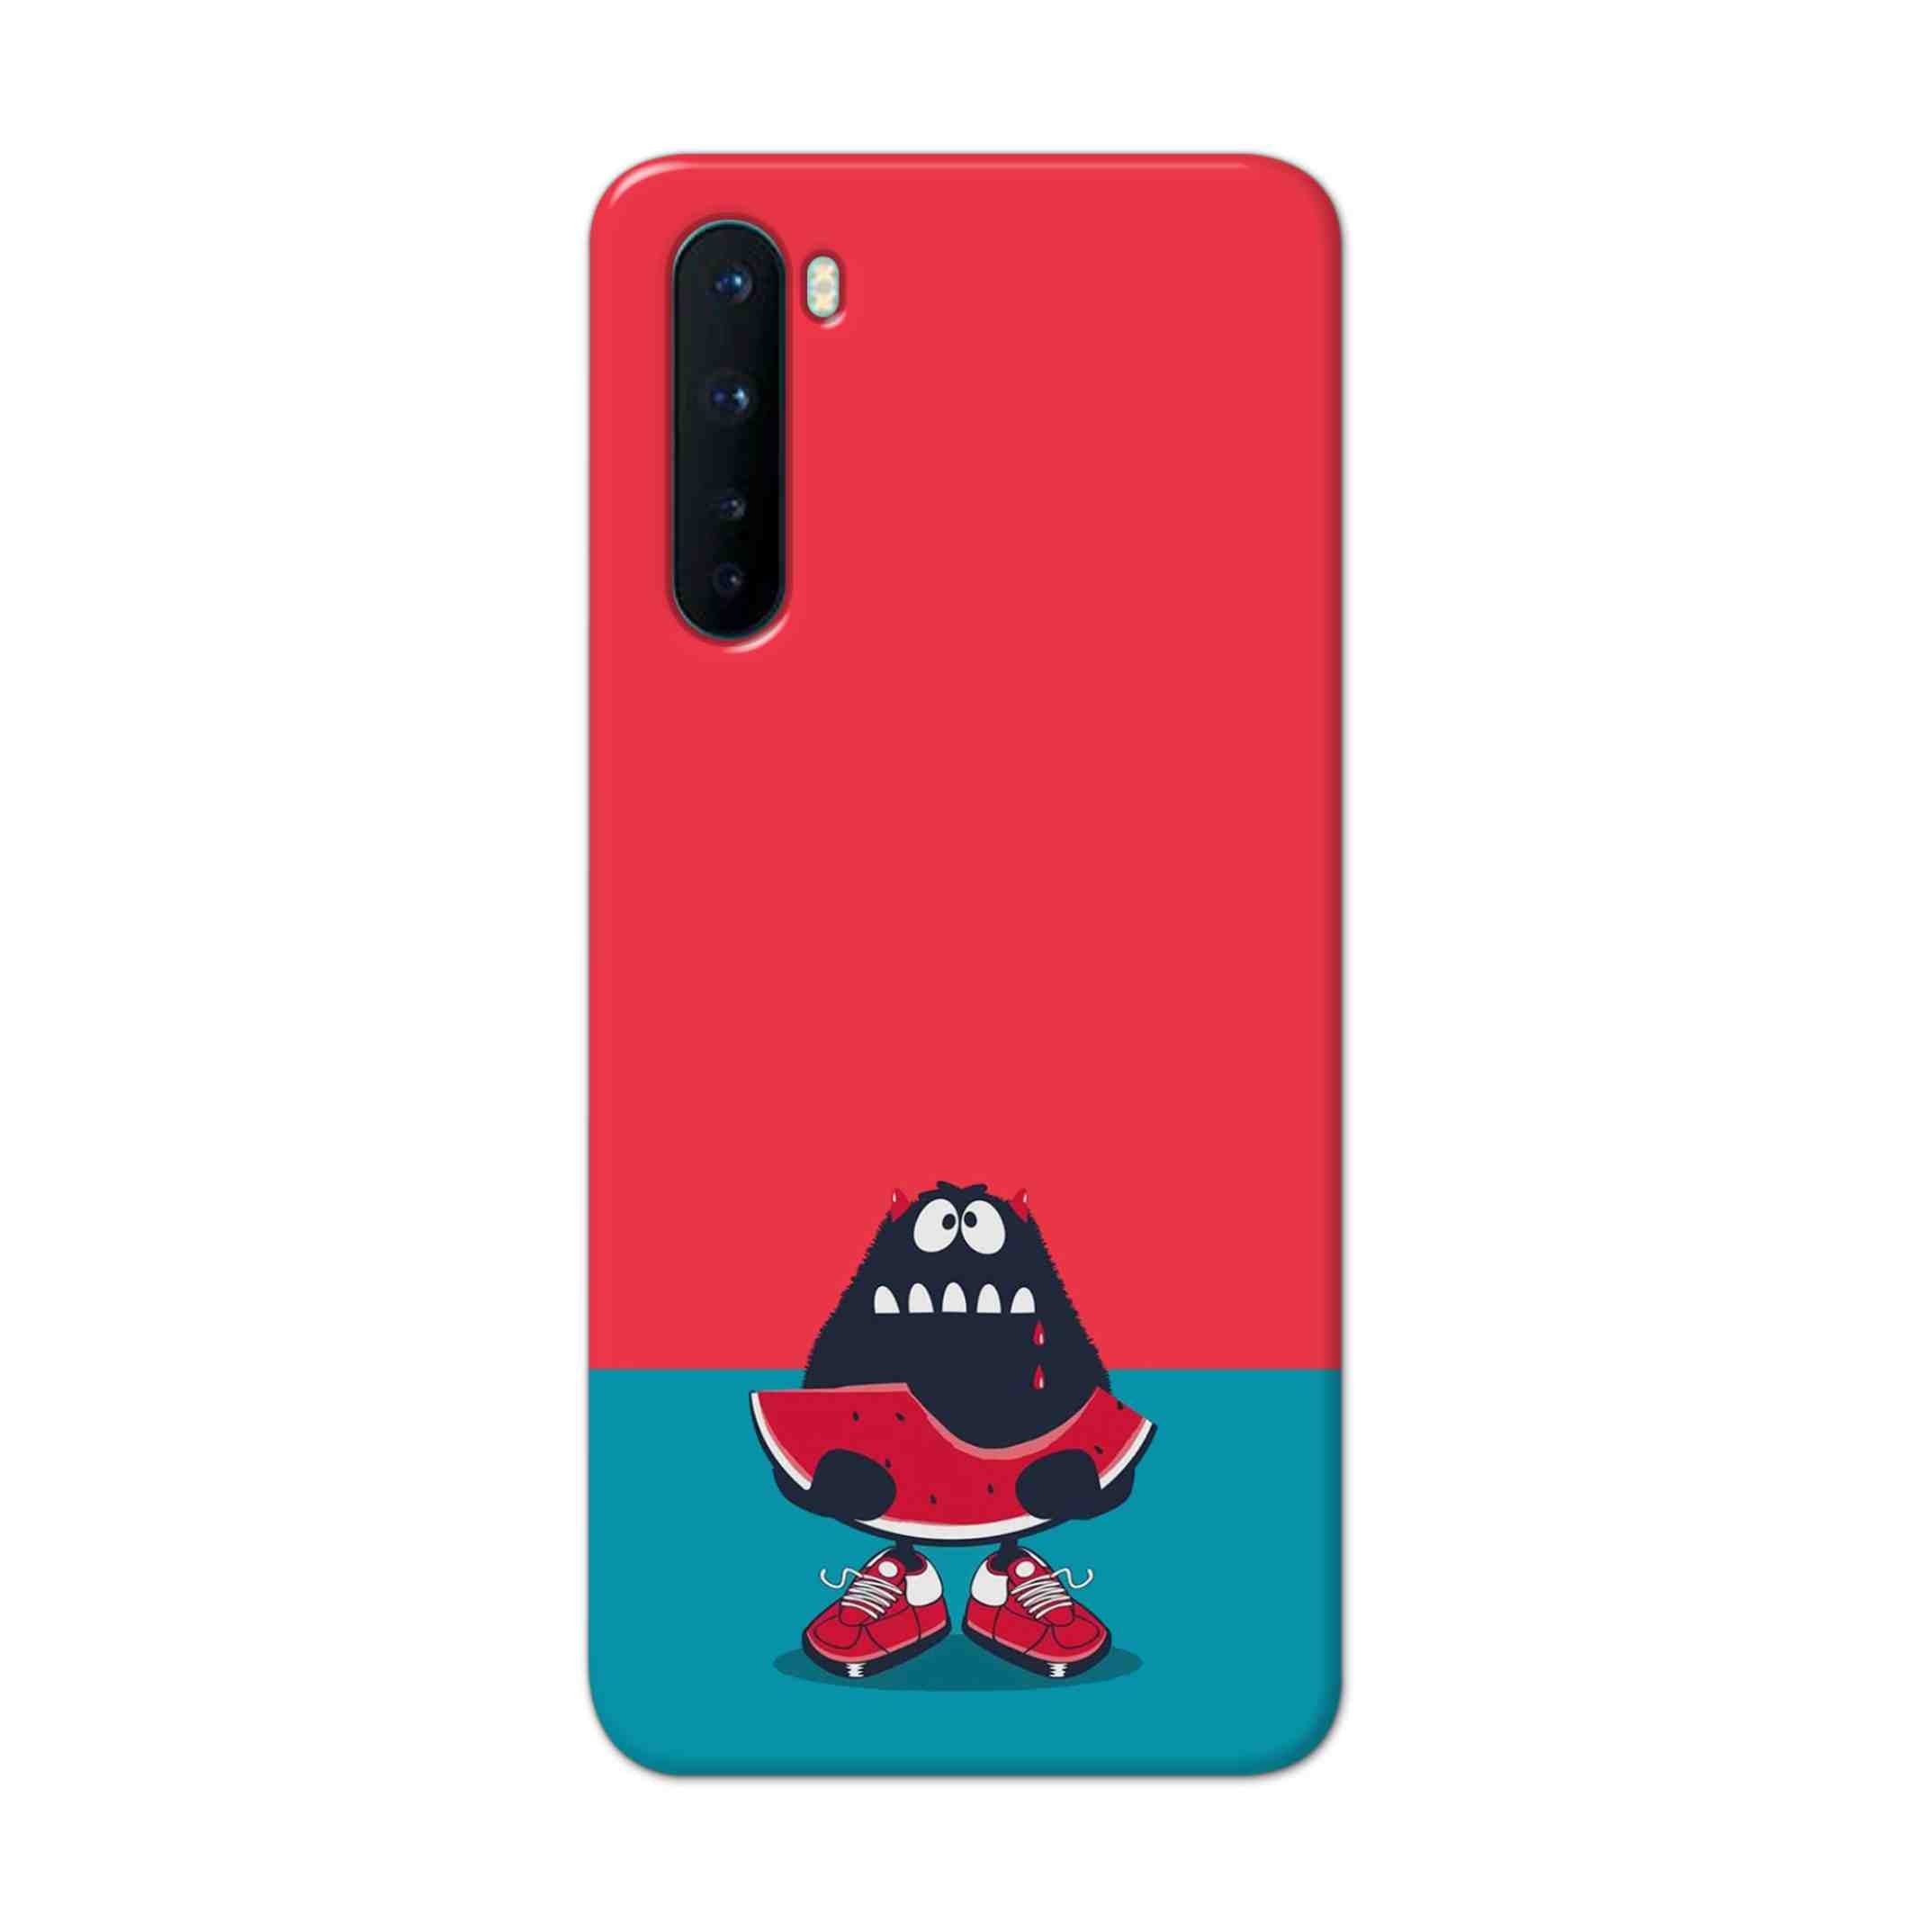 Buy Watermelon Hard Back Mobile Phone Case Cover For OnePlus Nord Online